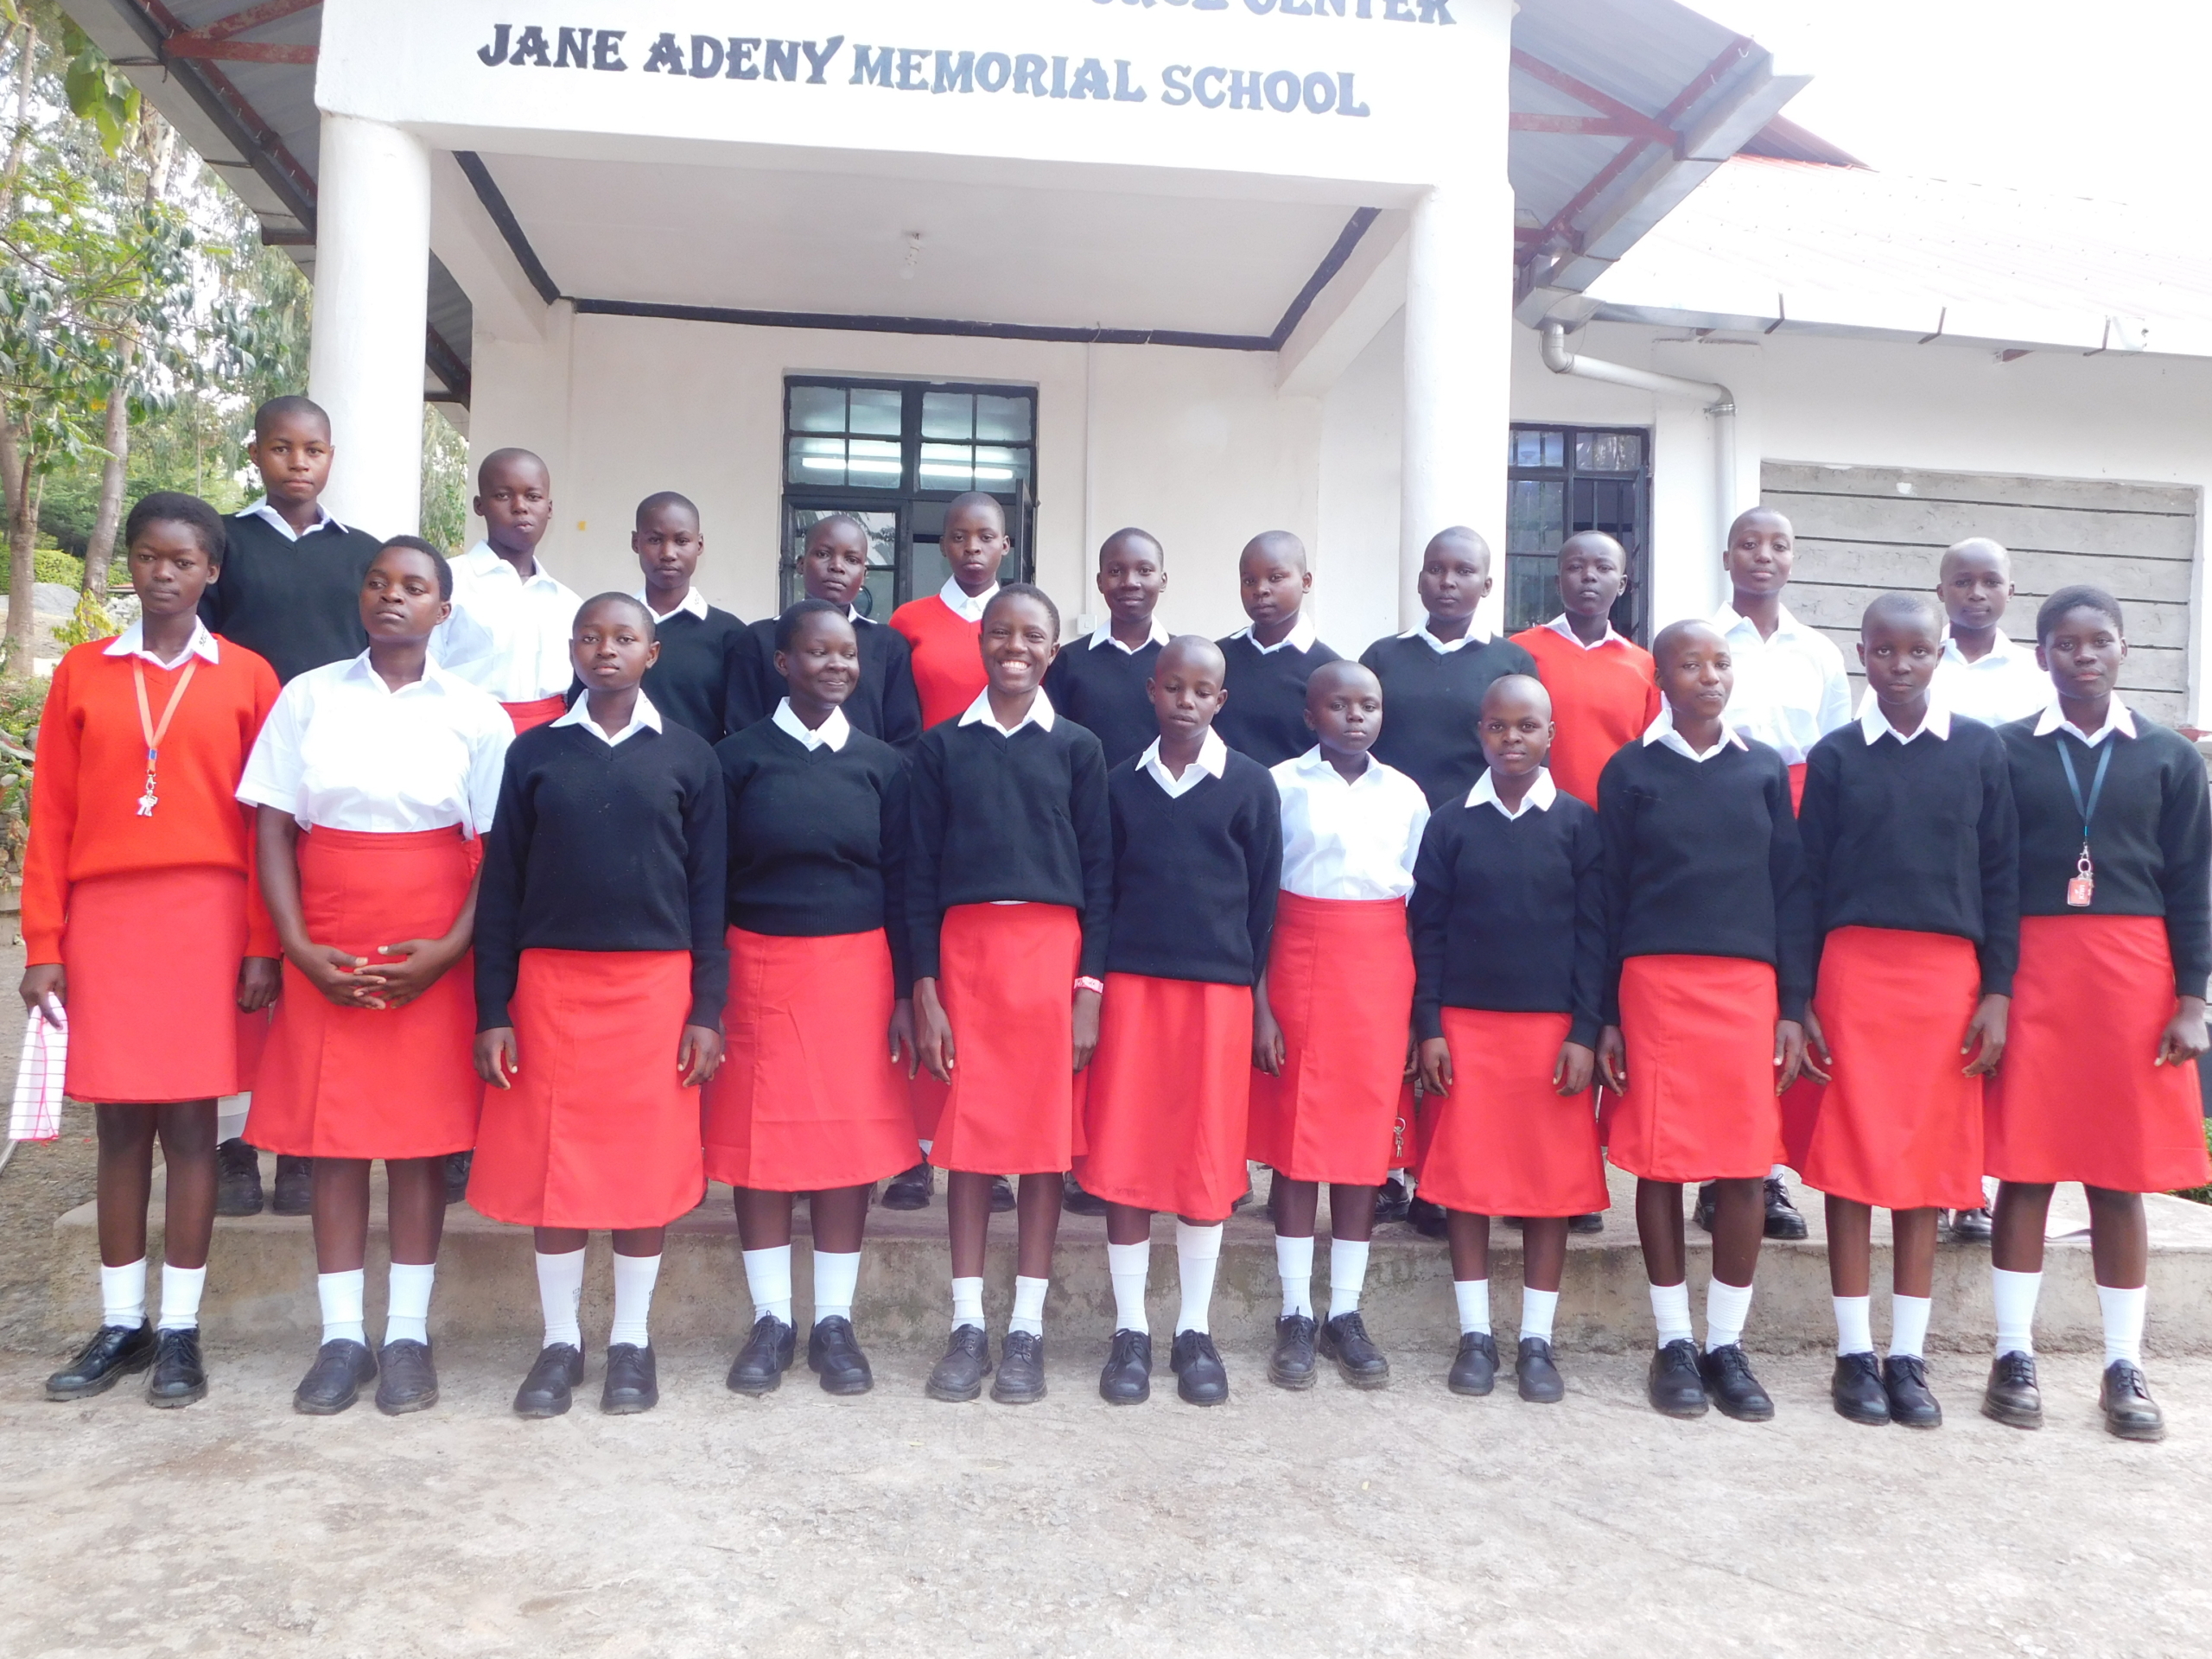 The new Class of 2026 scholarship students entered JAMS in early February